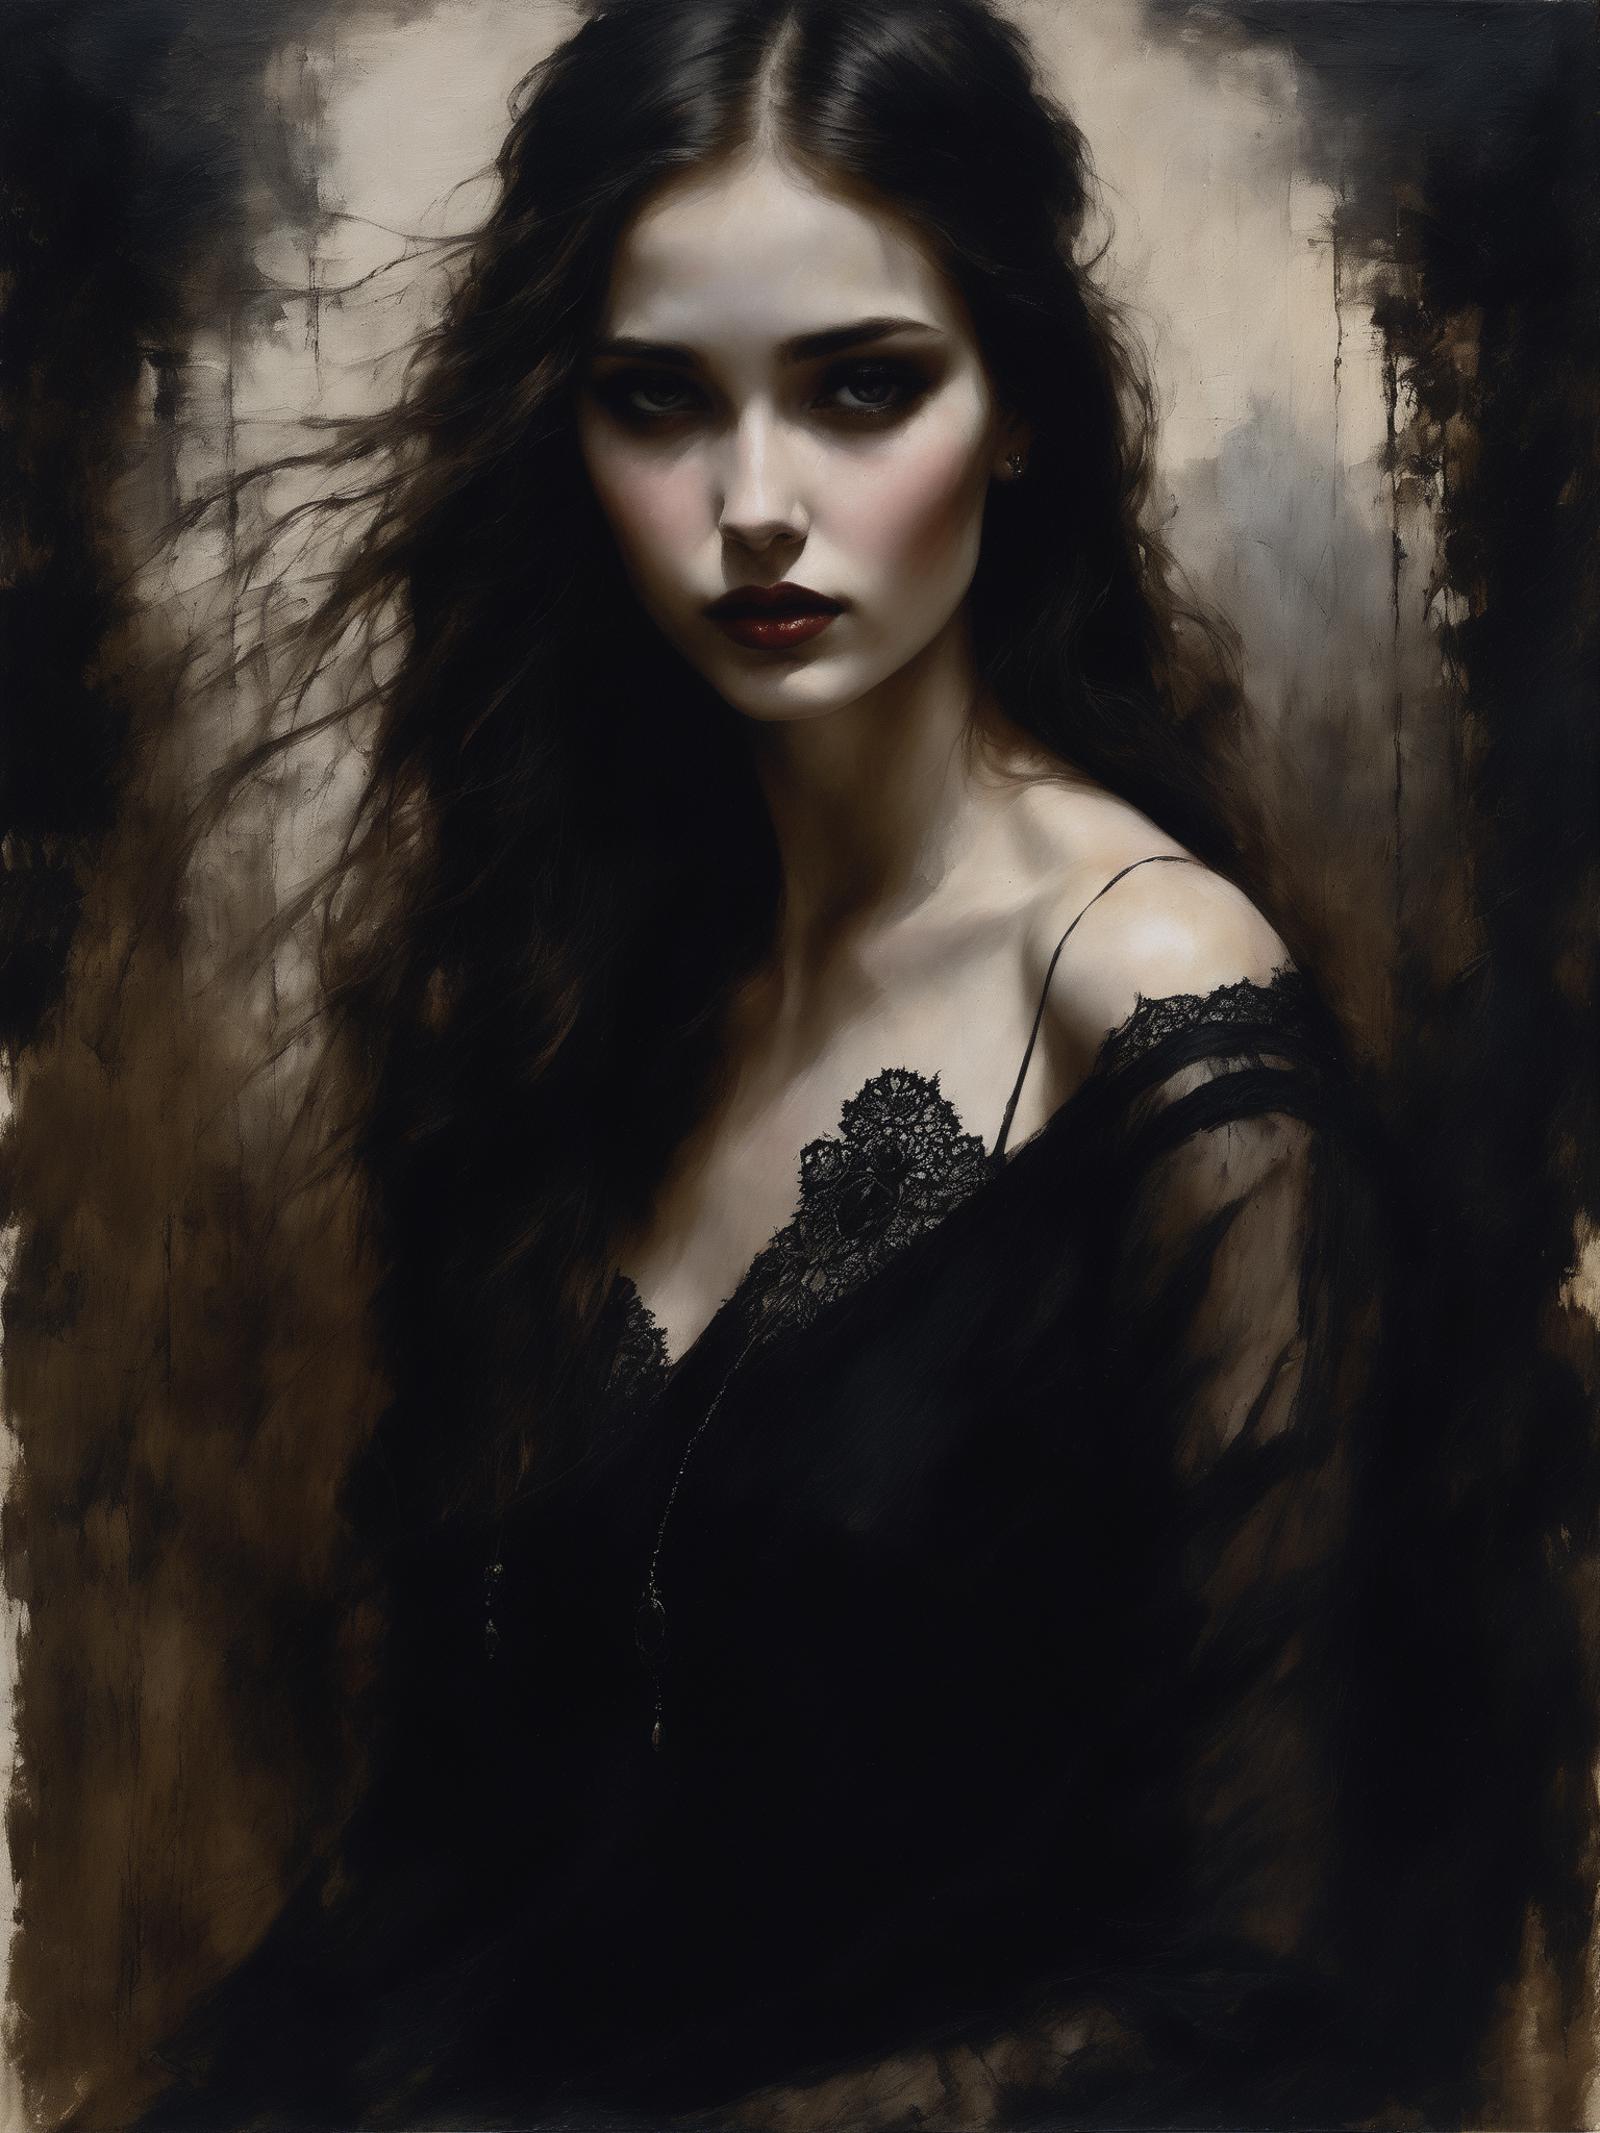 A portrait of a beautiful woman with long hair, a black dress, and a mysterious gaze.